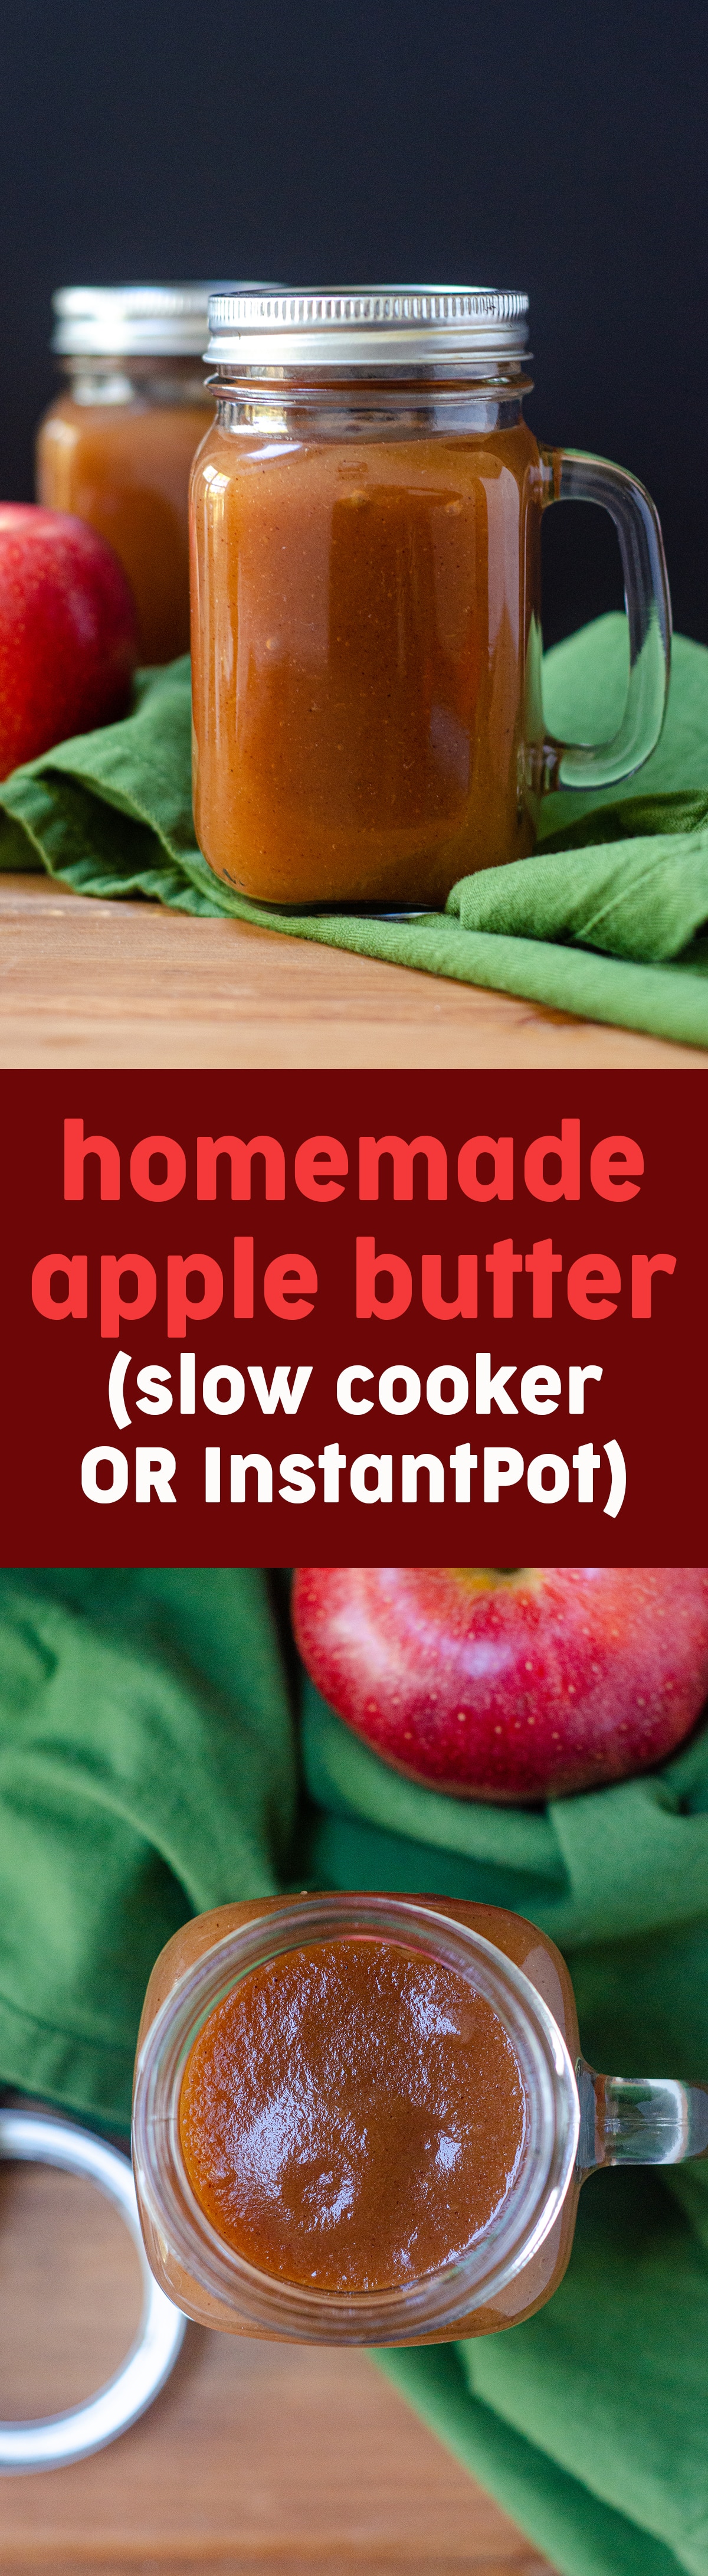 Make your own sweet and smooth apple butter at home with an Instant Pot or a slow cooker. via @frshaprilflours